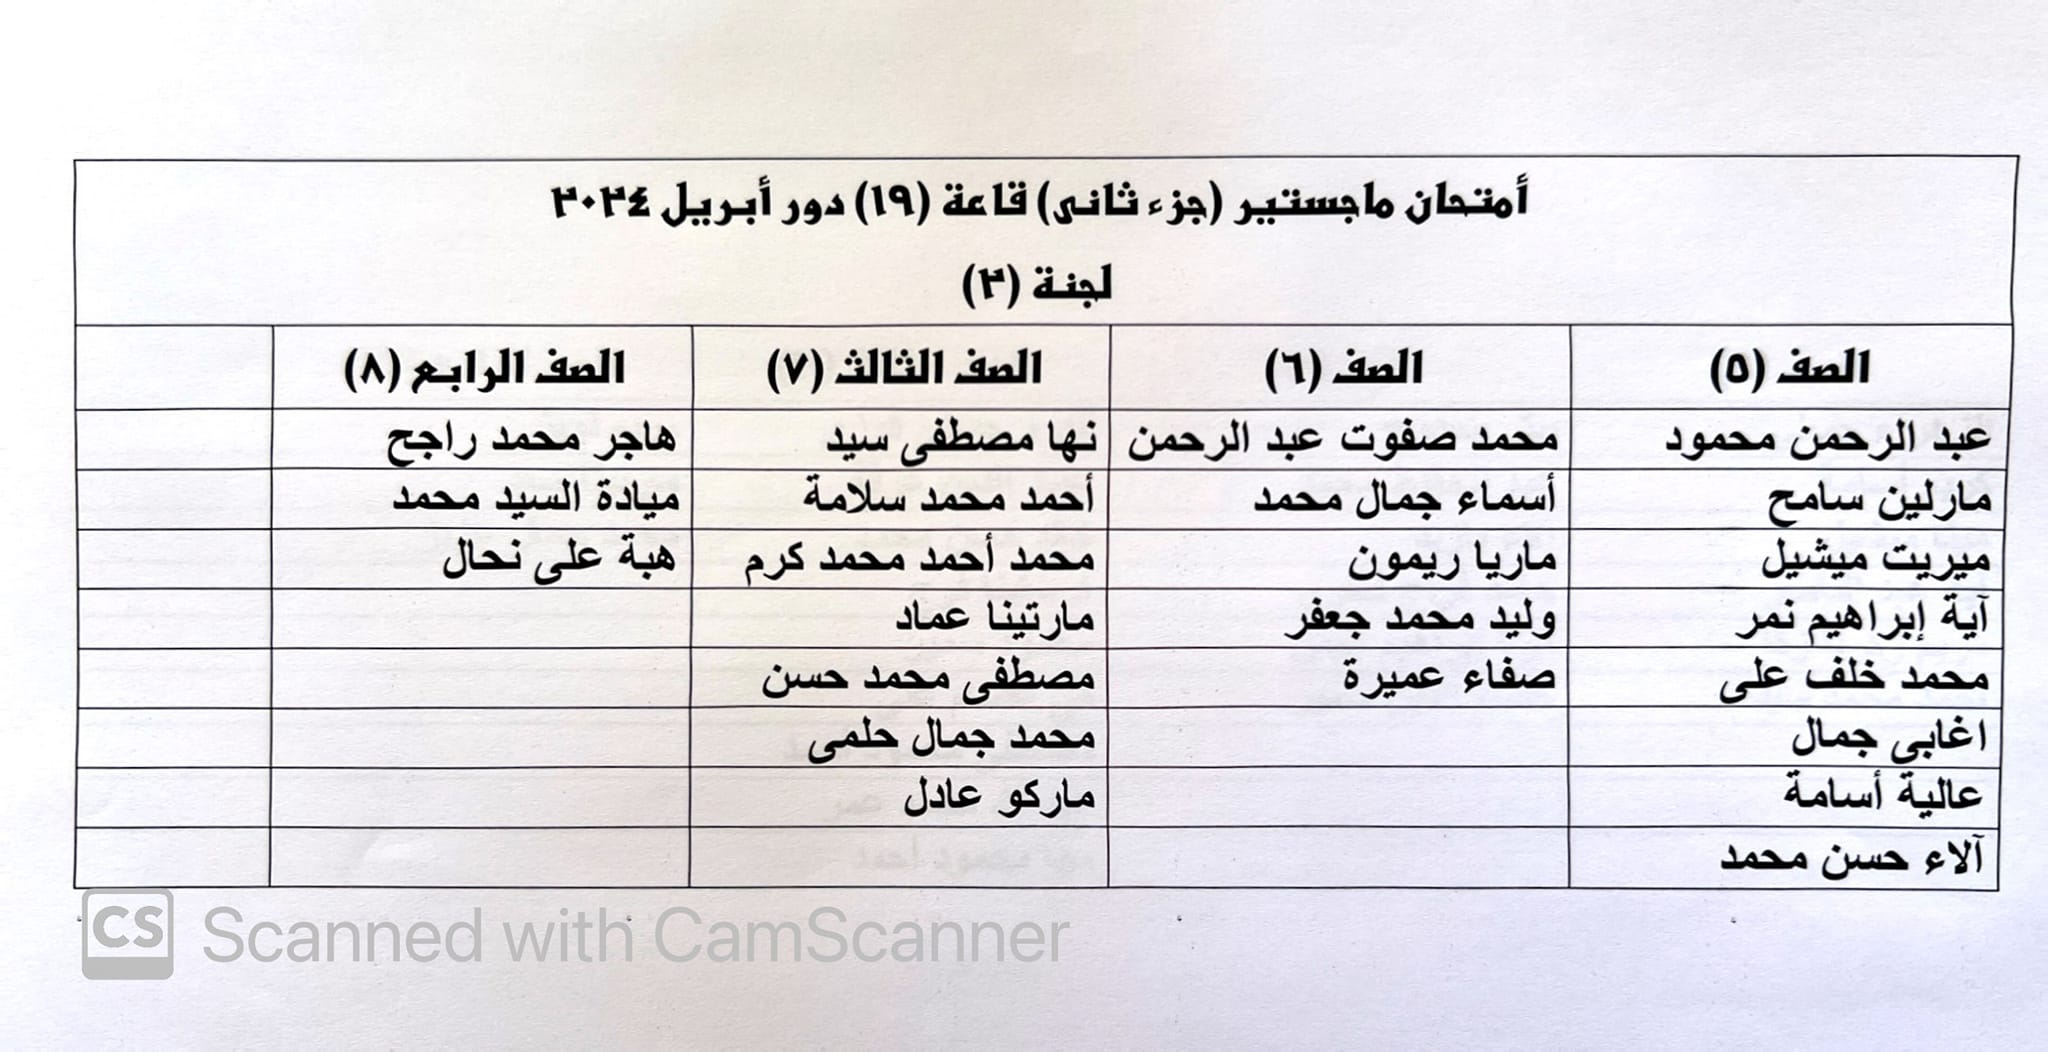 Division of master’s exam halls, part two, April 2024, halls (19) and (20) below the Banque Misr